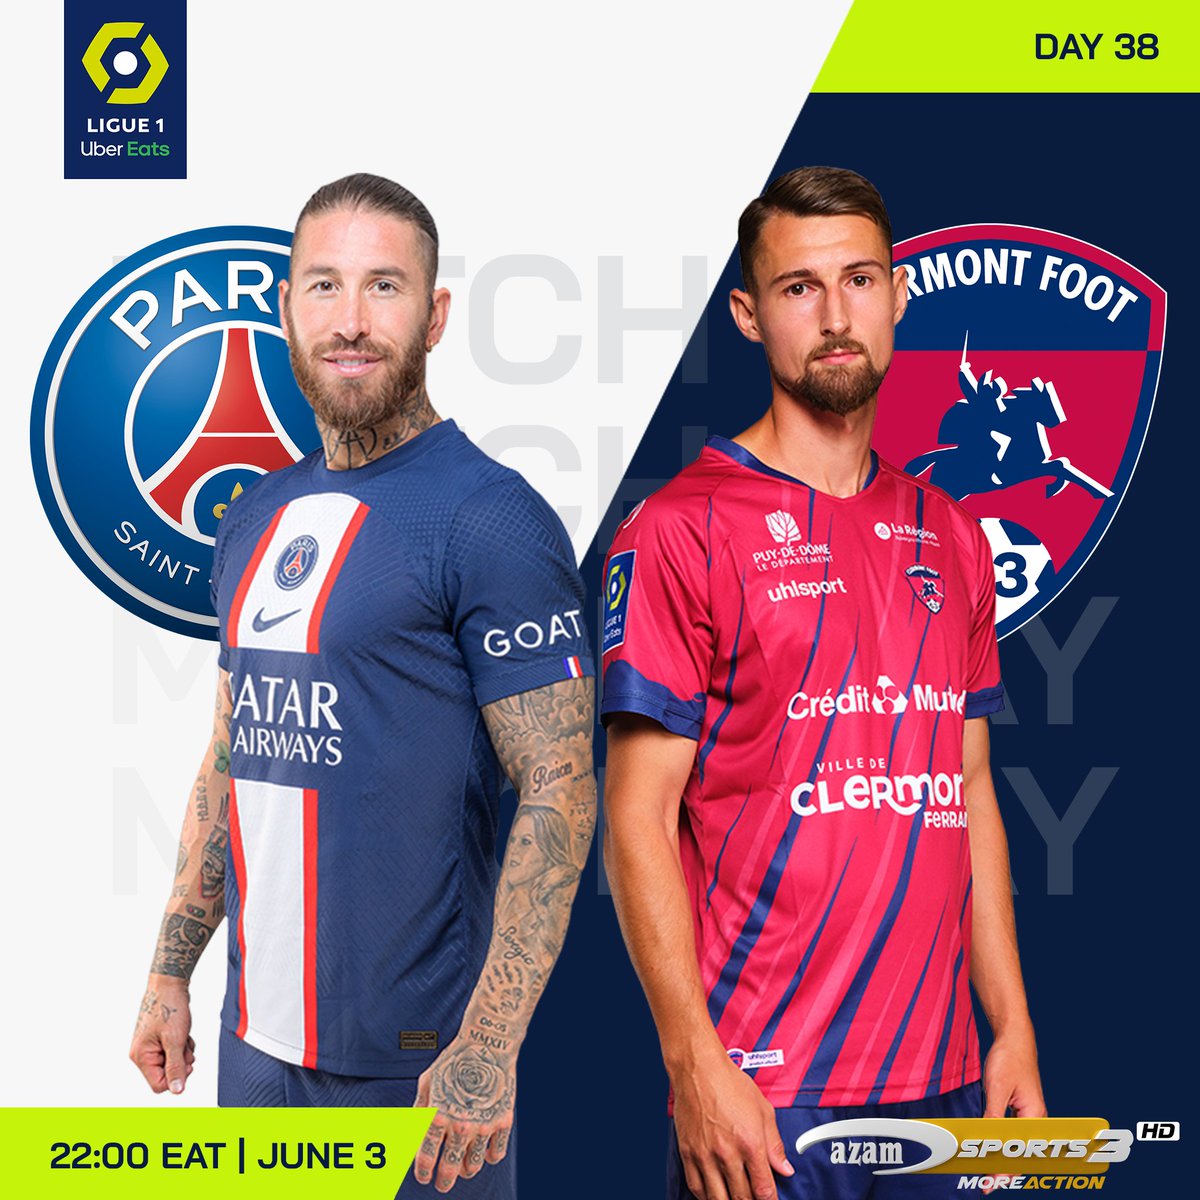 The long awaited day  comes for the #PSGCLE, #AUXRCL, #MONTOU. The ⚽️🐐#LEO_MESSI will be making his last tribute to the french football. #AzamSports3HD
#ENTERTAINMENTFOREVERYBODY